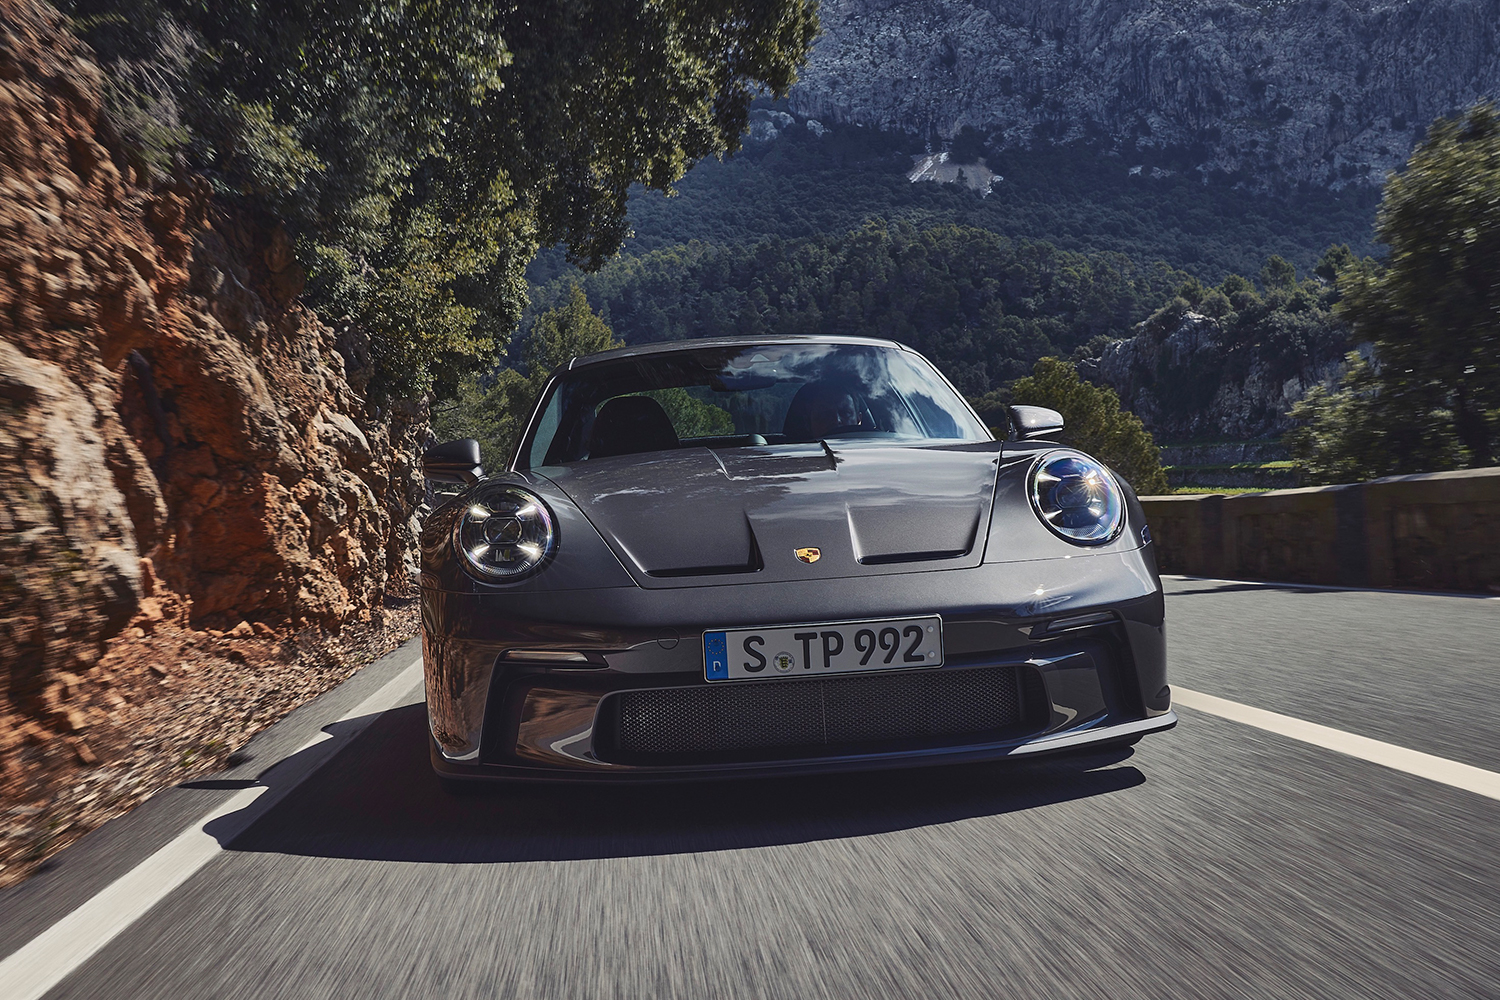 The new Porsche 911 GT3 with Touring package driving a scenic road